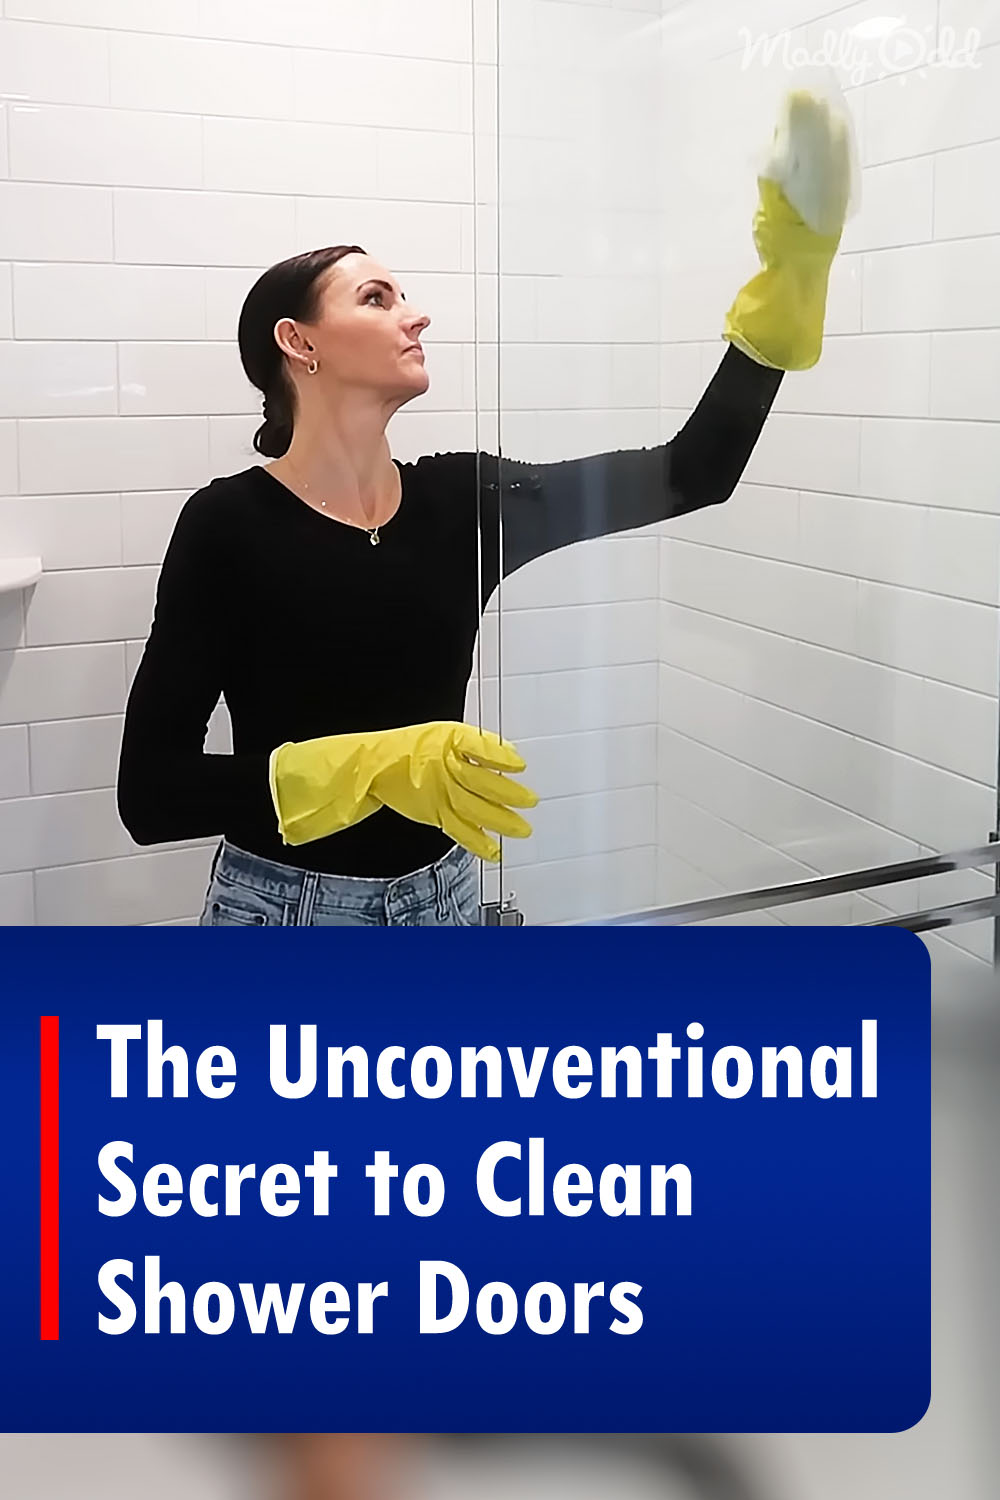 The Unconventional Secret to Clean Shower Doors